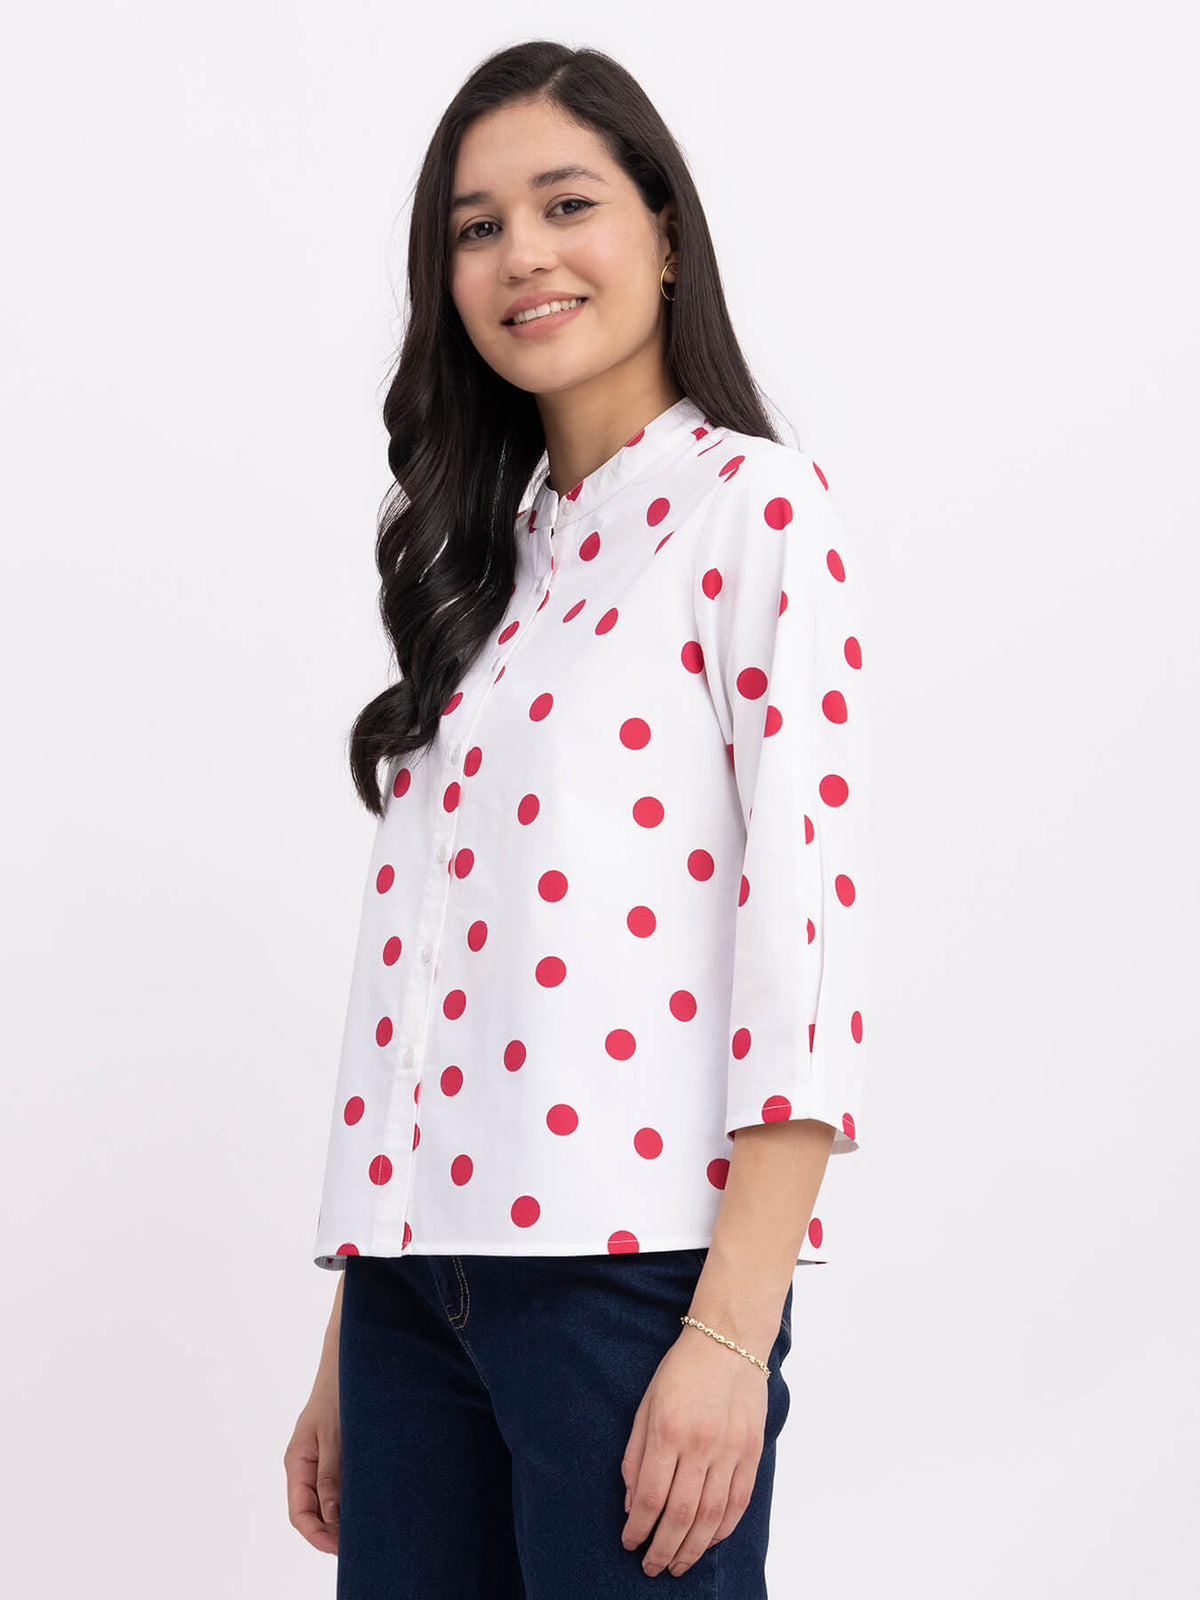 Cotton Polka Dot Top - White And Red